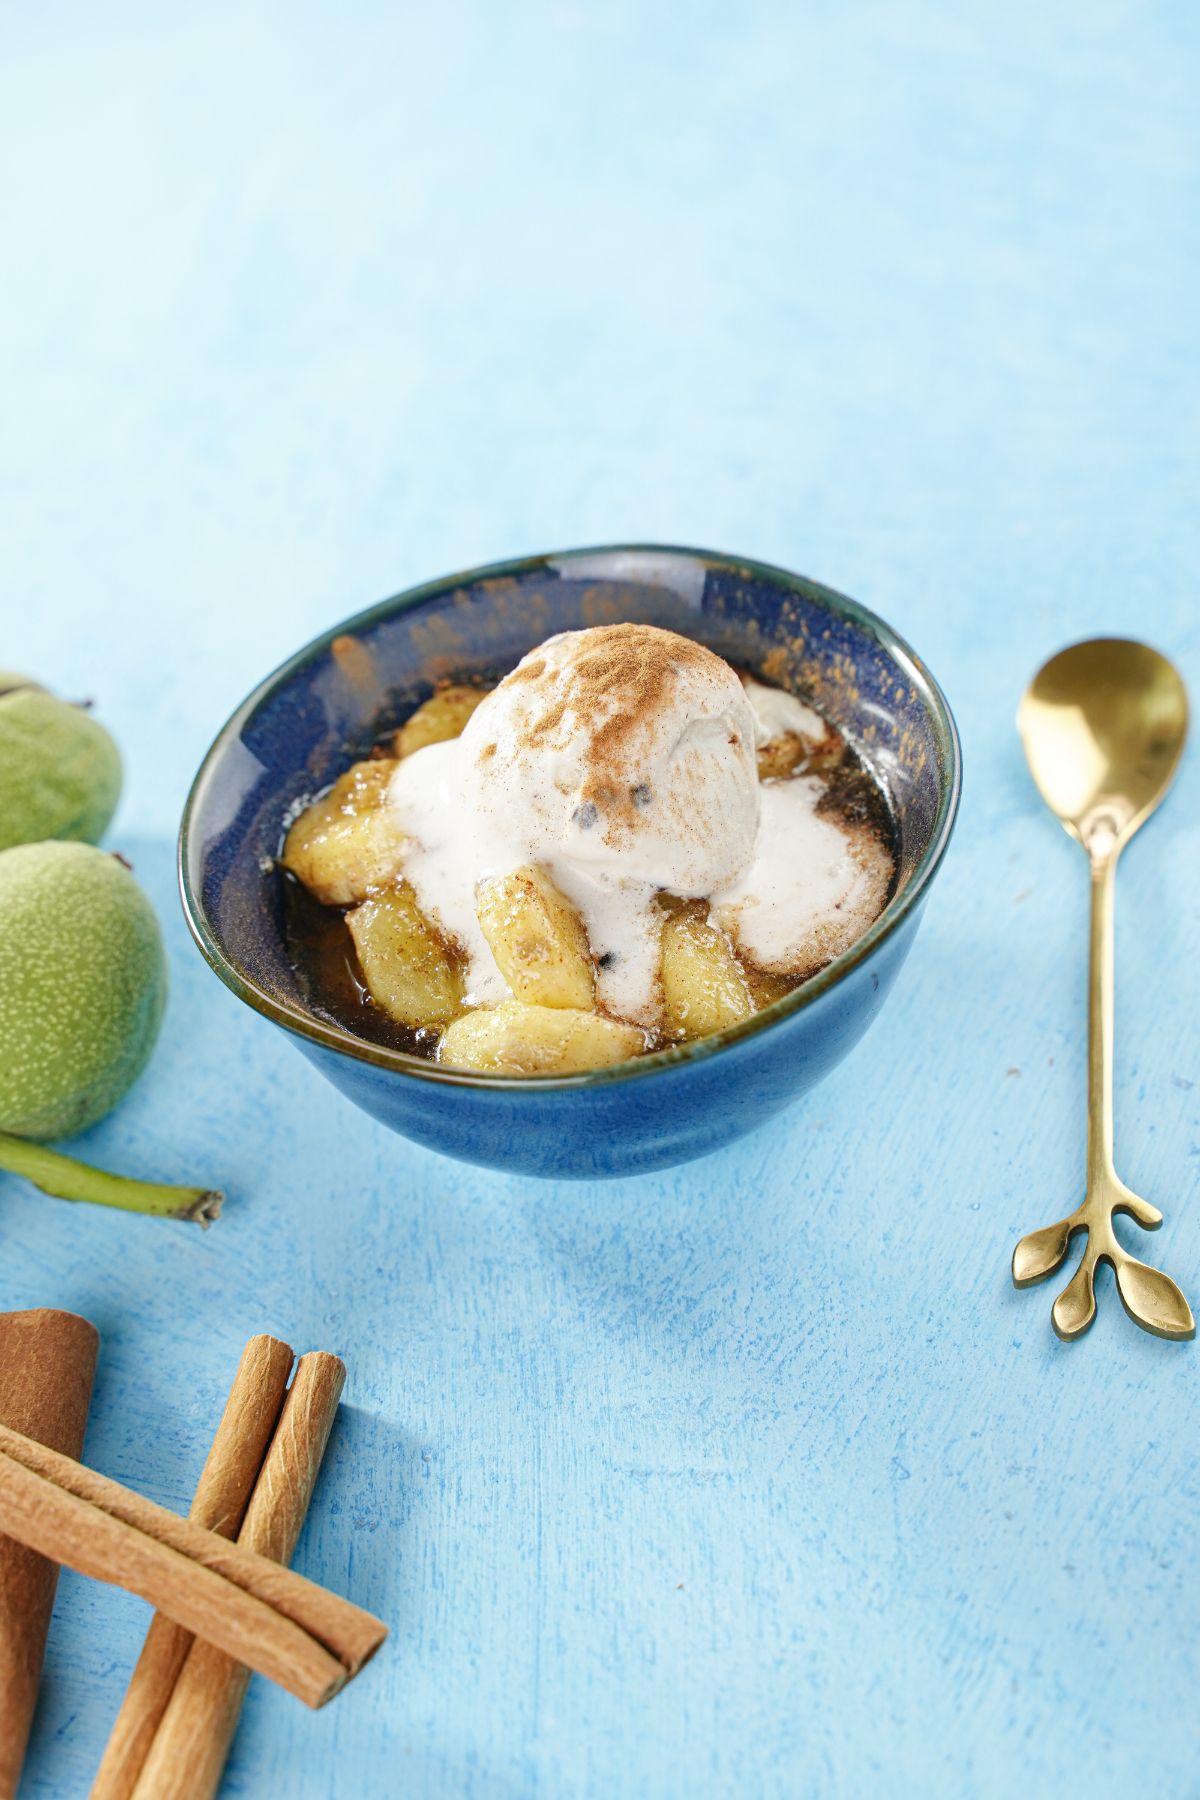 Cinnamon Spiced Bananas served with ice creams in a bowl with a golden spoon